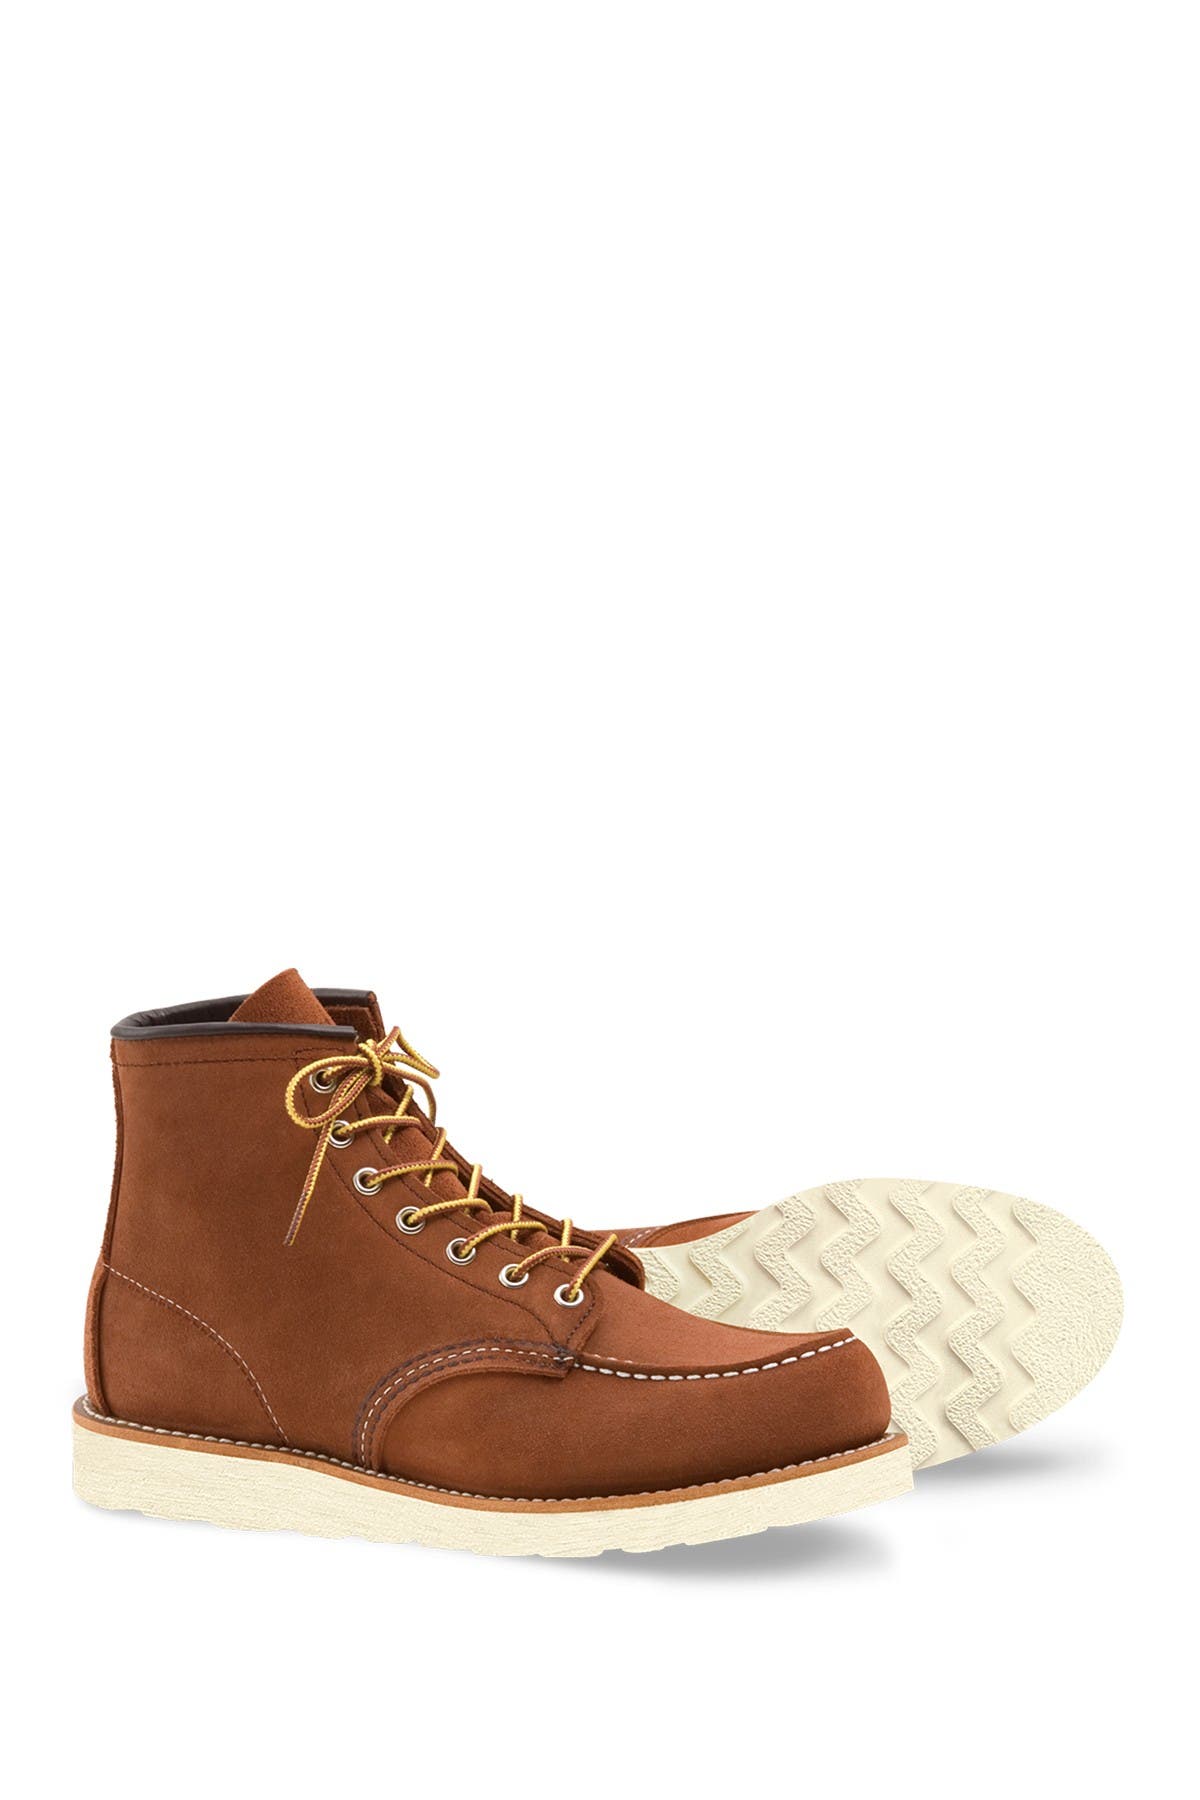 red wing shoes nordstrom rack